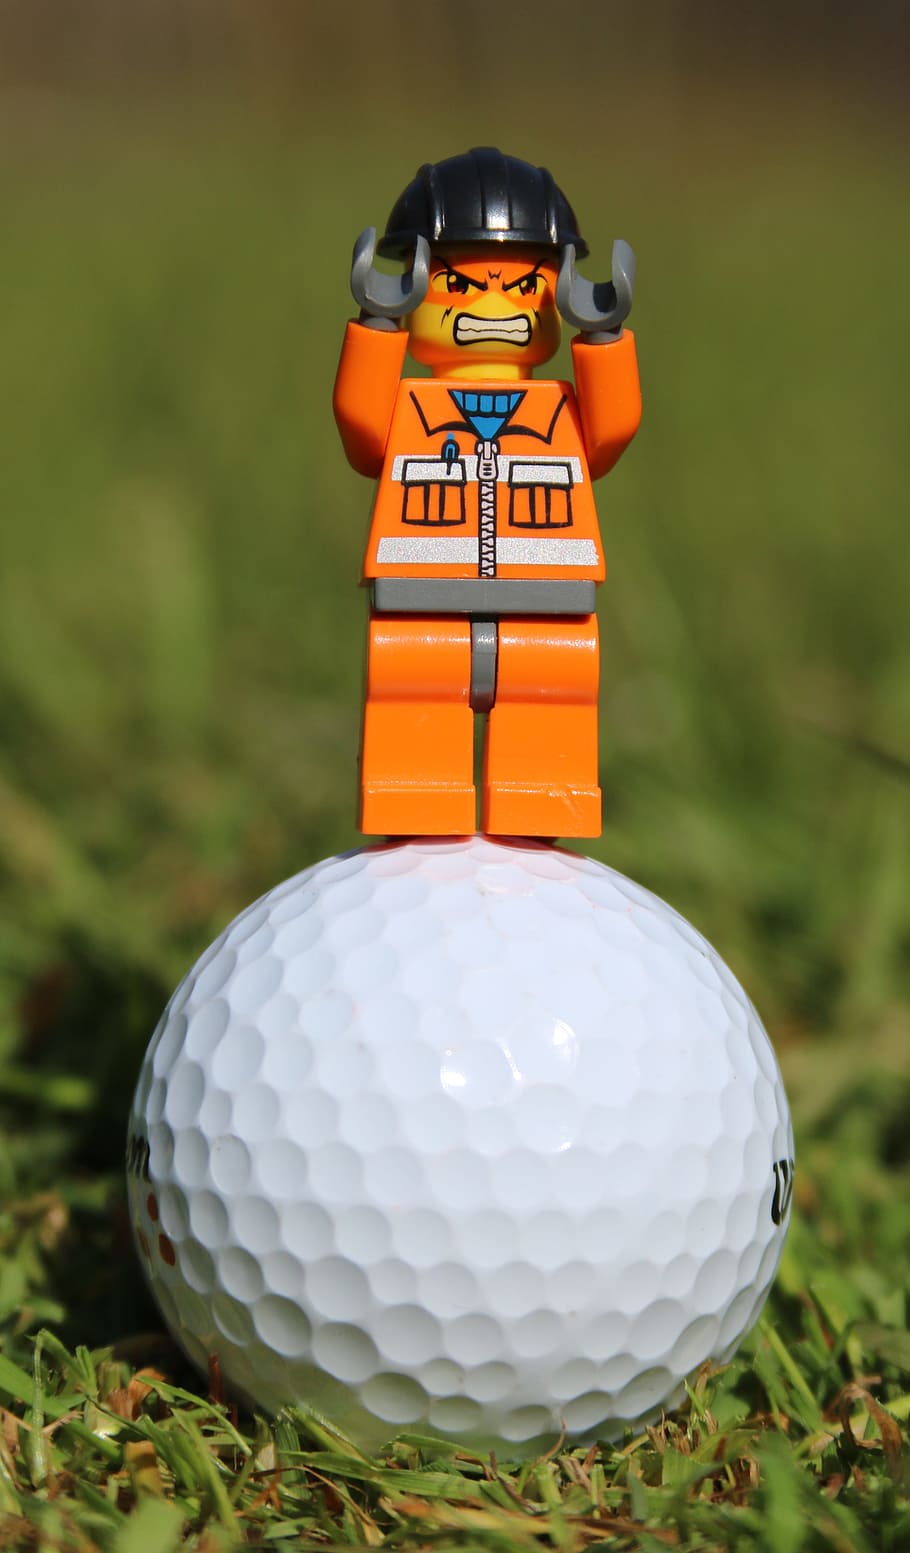 mini figure, golf ball, golf, angry, funny, toy man, man, grass, face, expression